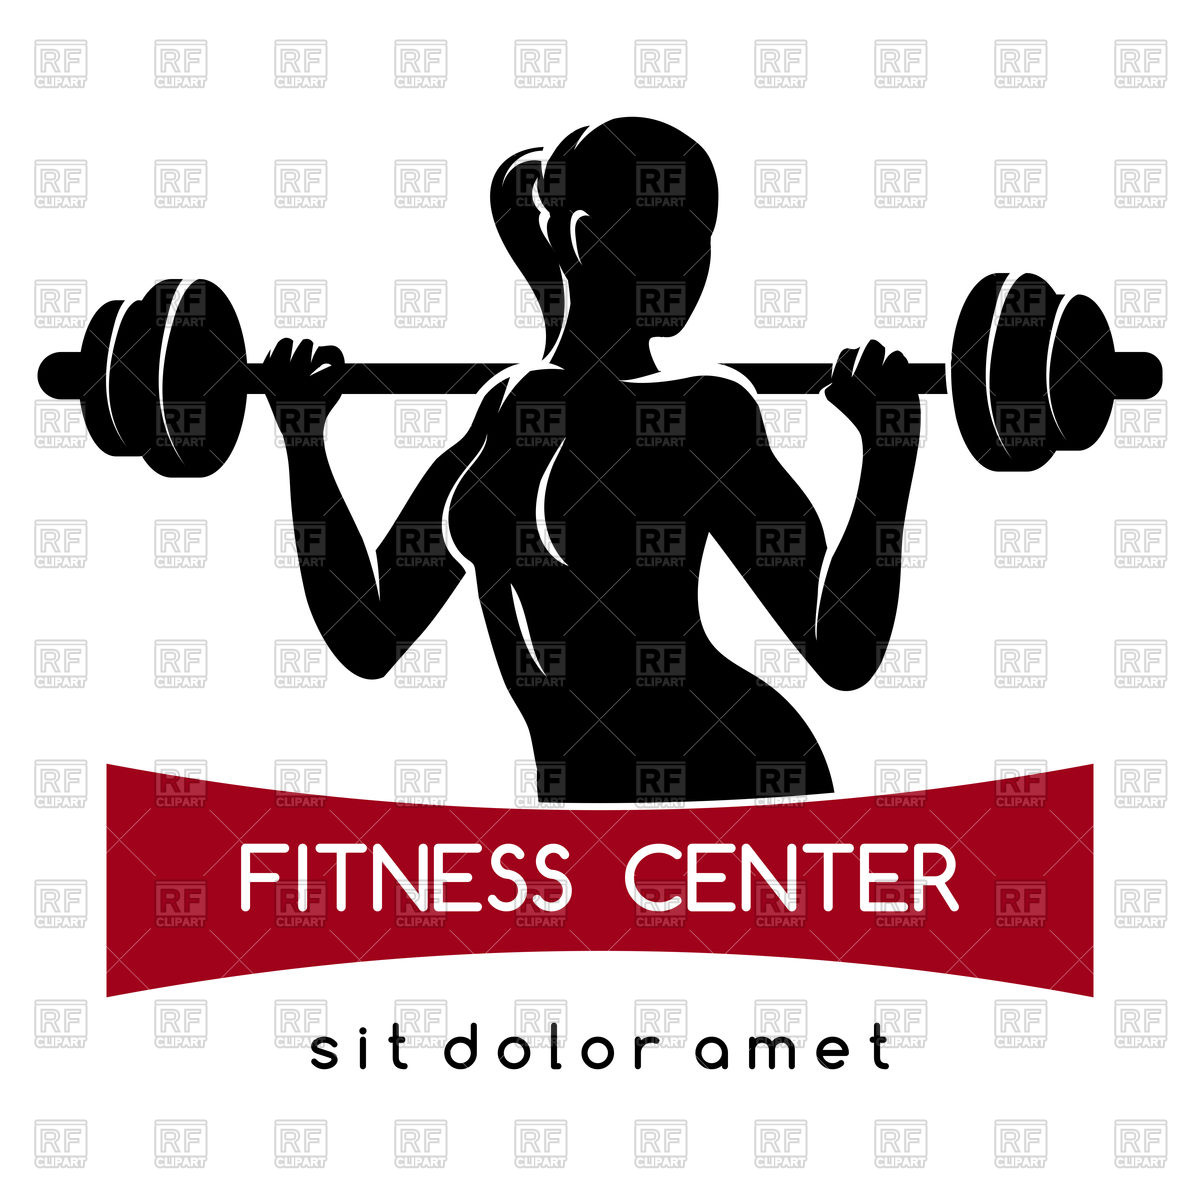 Fitness Center Or Gym Emblem   Woman With Barbell 91515 Download